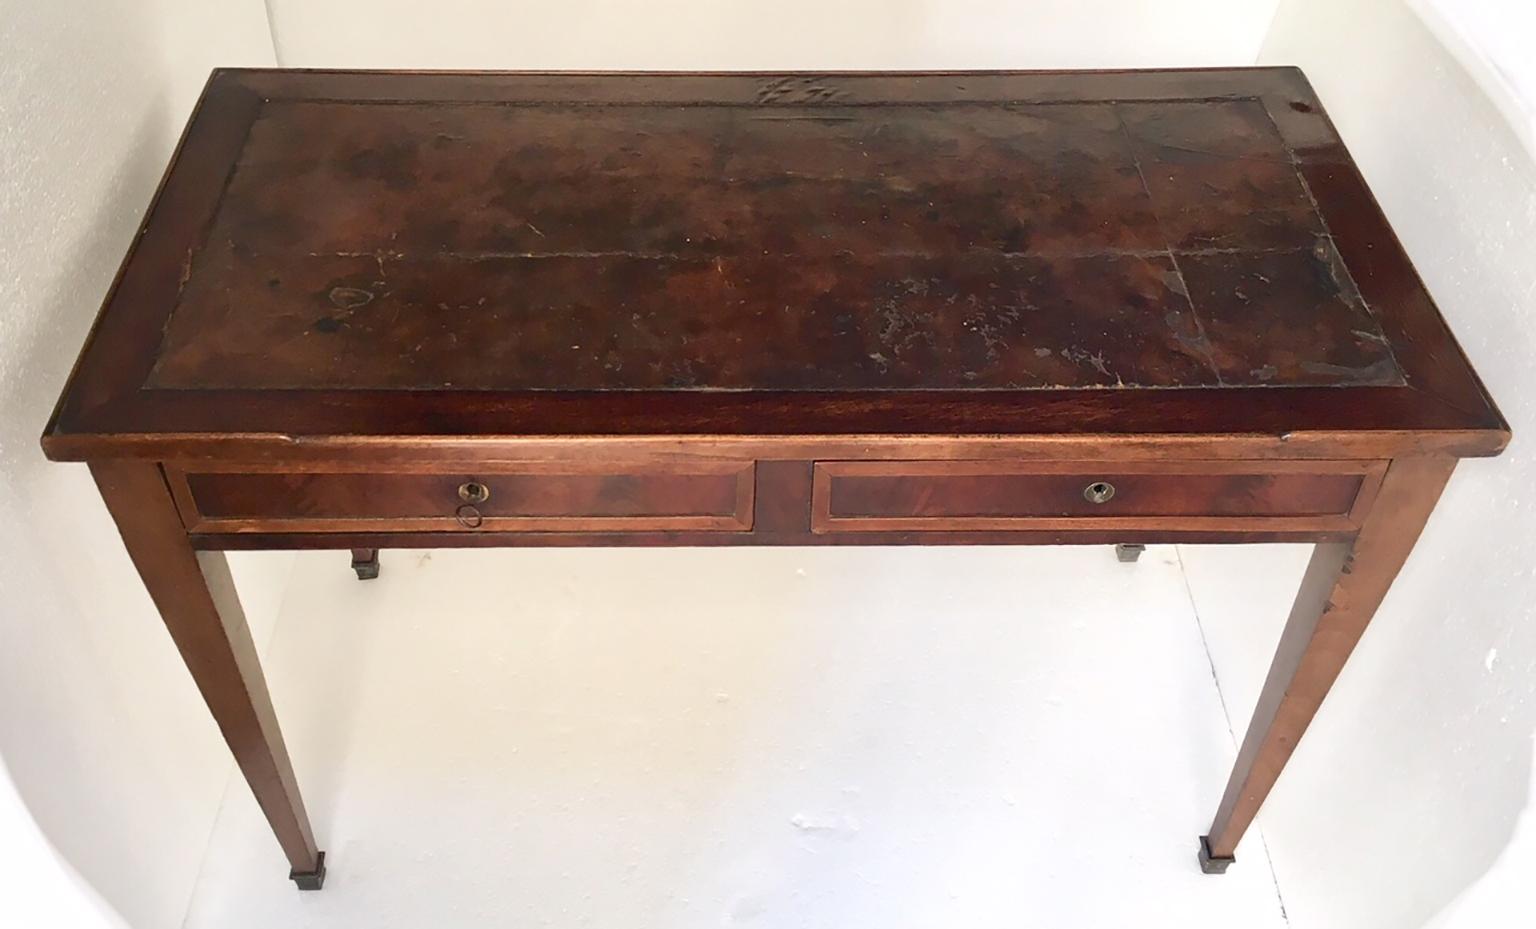 Simple and elegant French writing desk, in Louis XVI style, made of mahogany palm wood, with the original leather top, has two drawers and the legs end in brass sabot